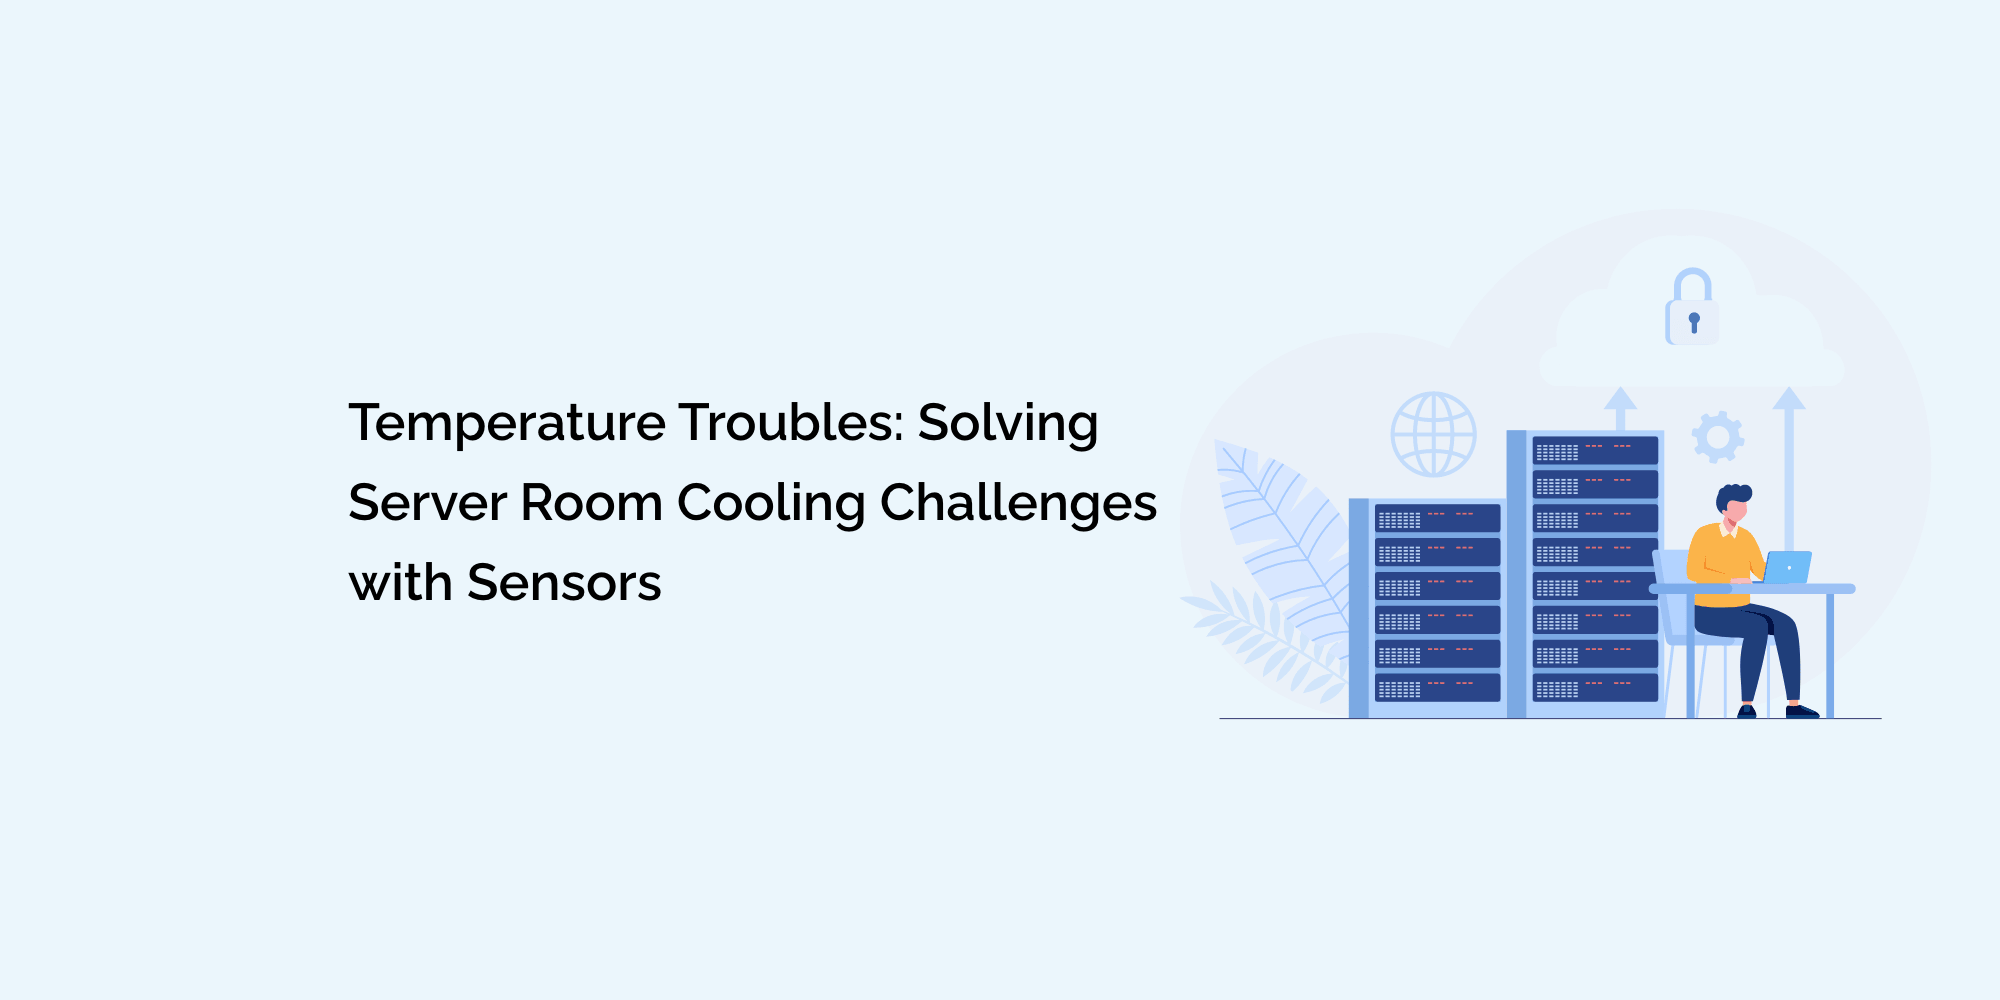 Temperature Troubles: Solving Server Room Cooling Challenges with Sensors